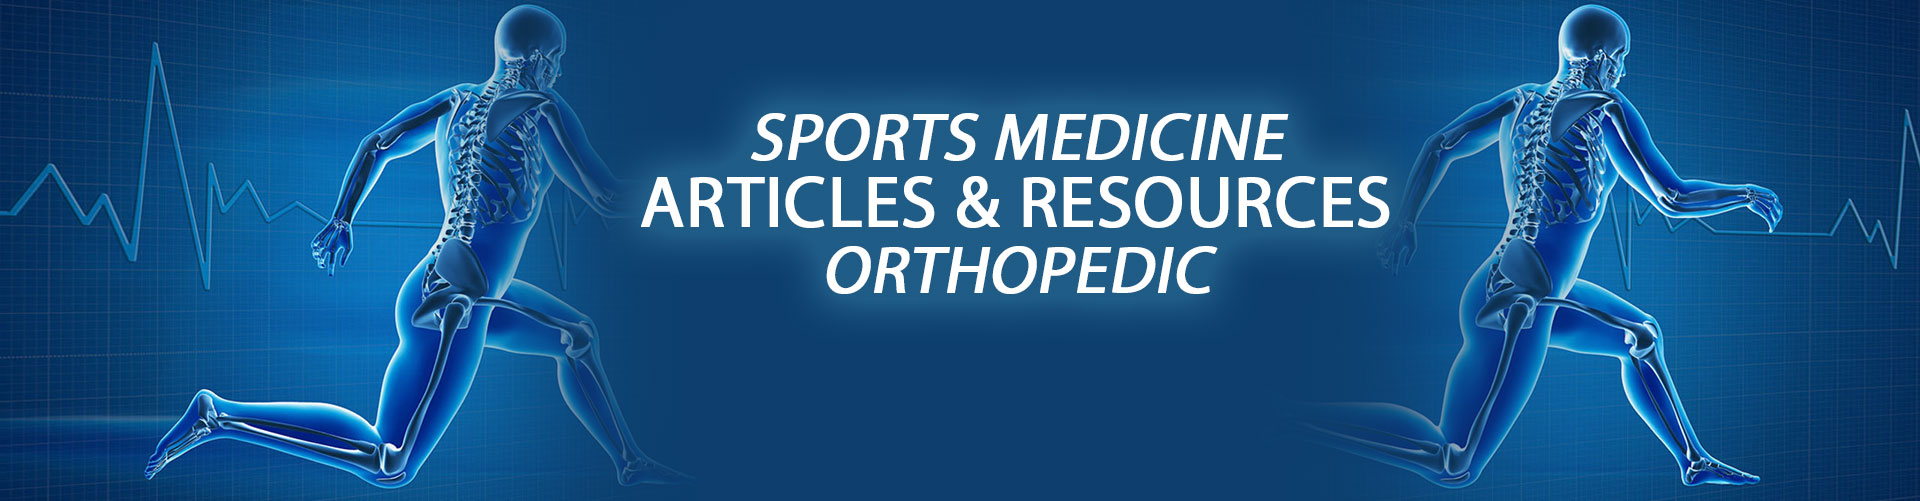 Kevin-Collins-MD-Sports-Medicine-Orthopedic-Surgeon-sports-medicine-articles-resources-banner